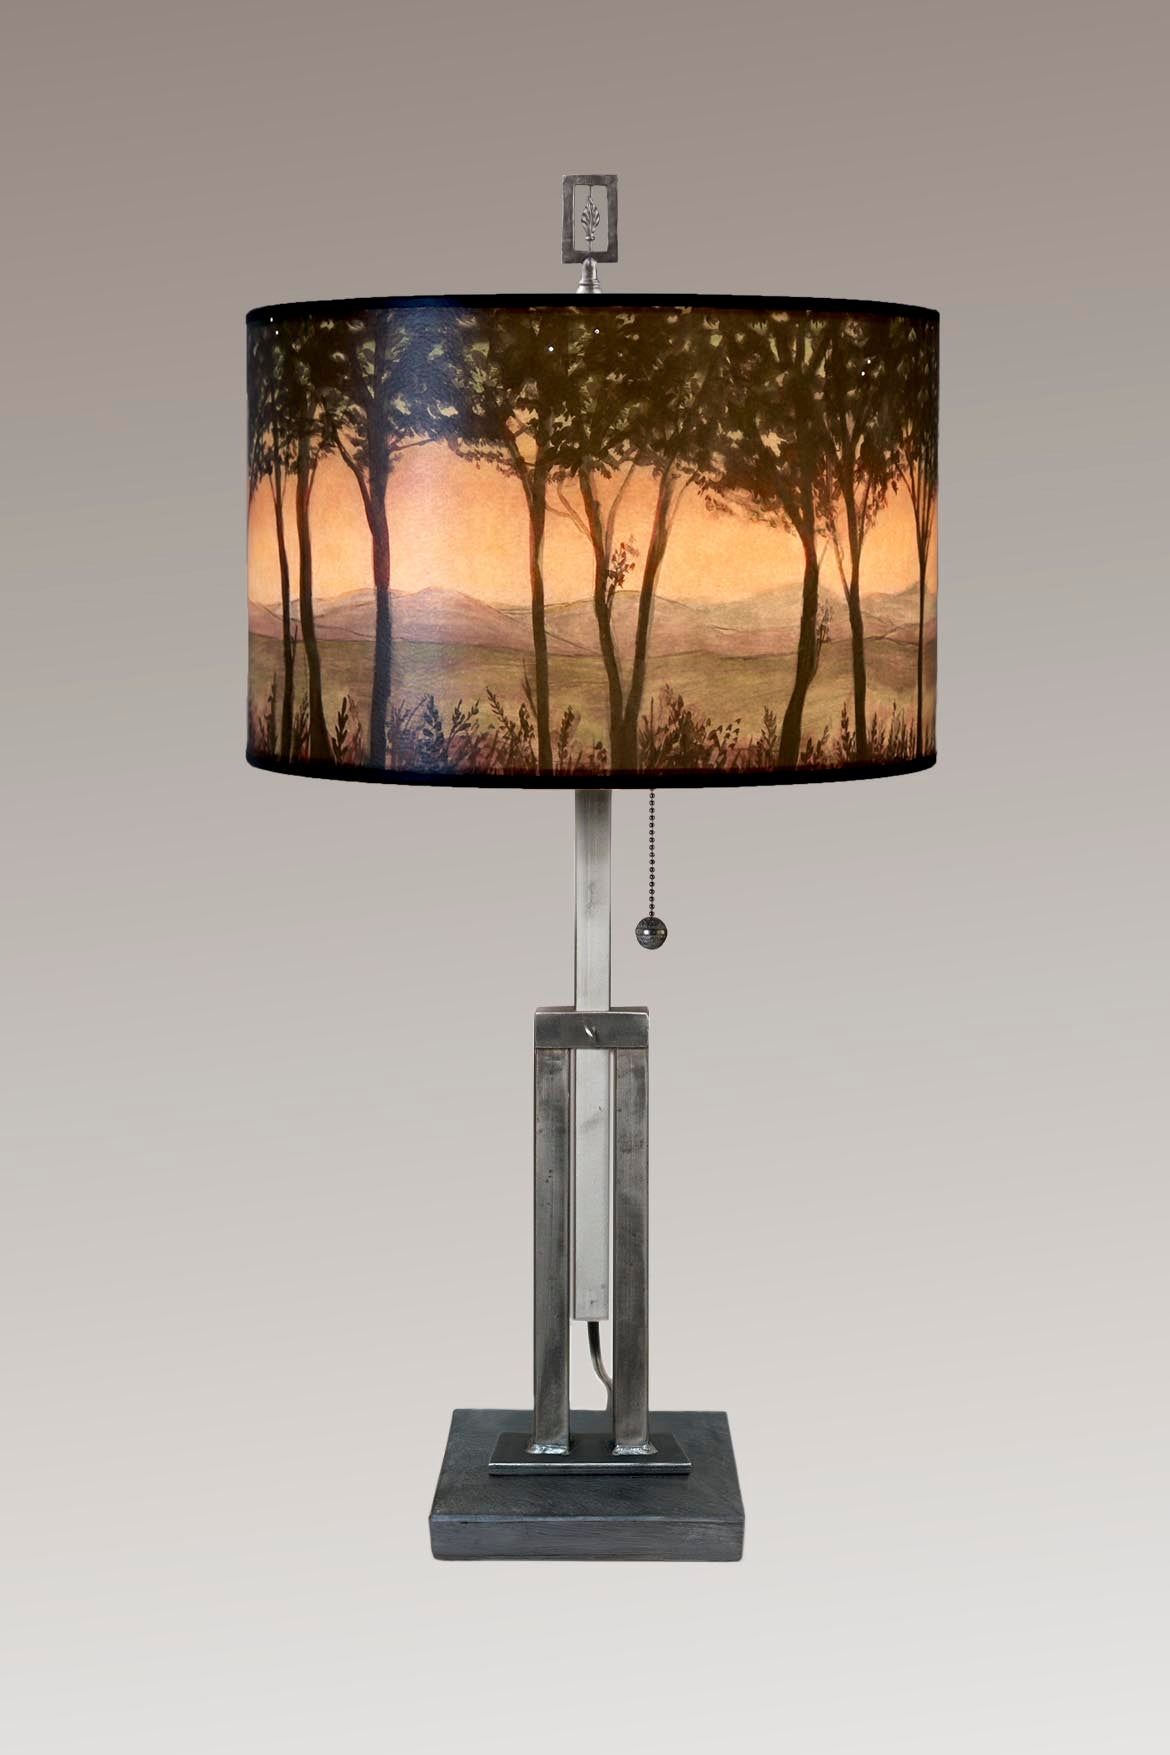 Janna Ugone & Co Table Lamp Adjustable-Height Steel Table Lamp with Large Drum Shade in Dawn